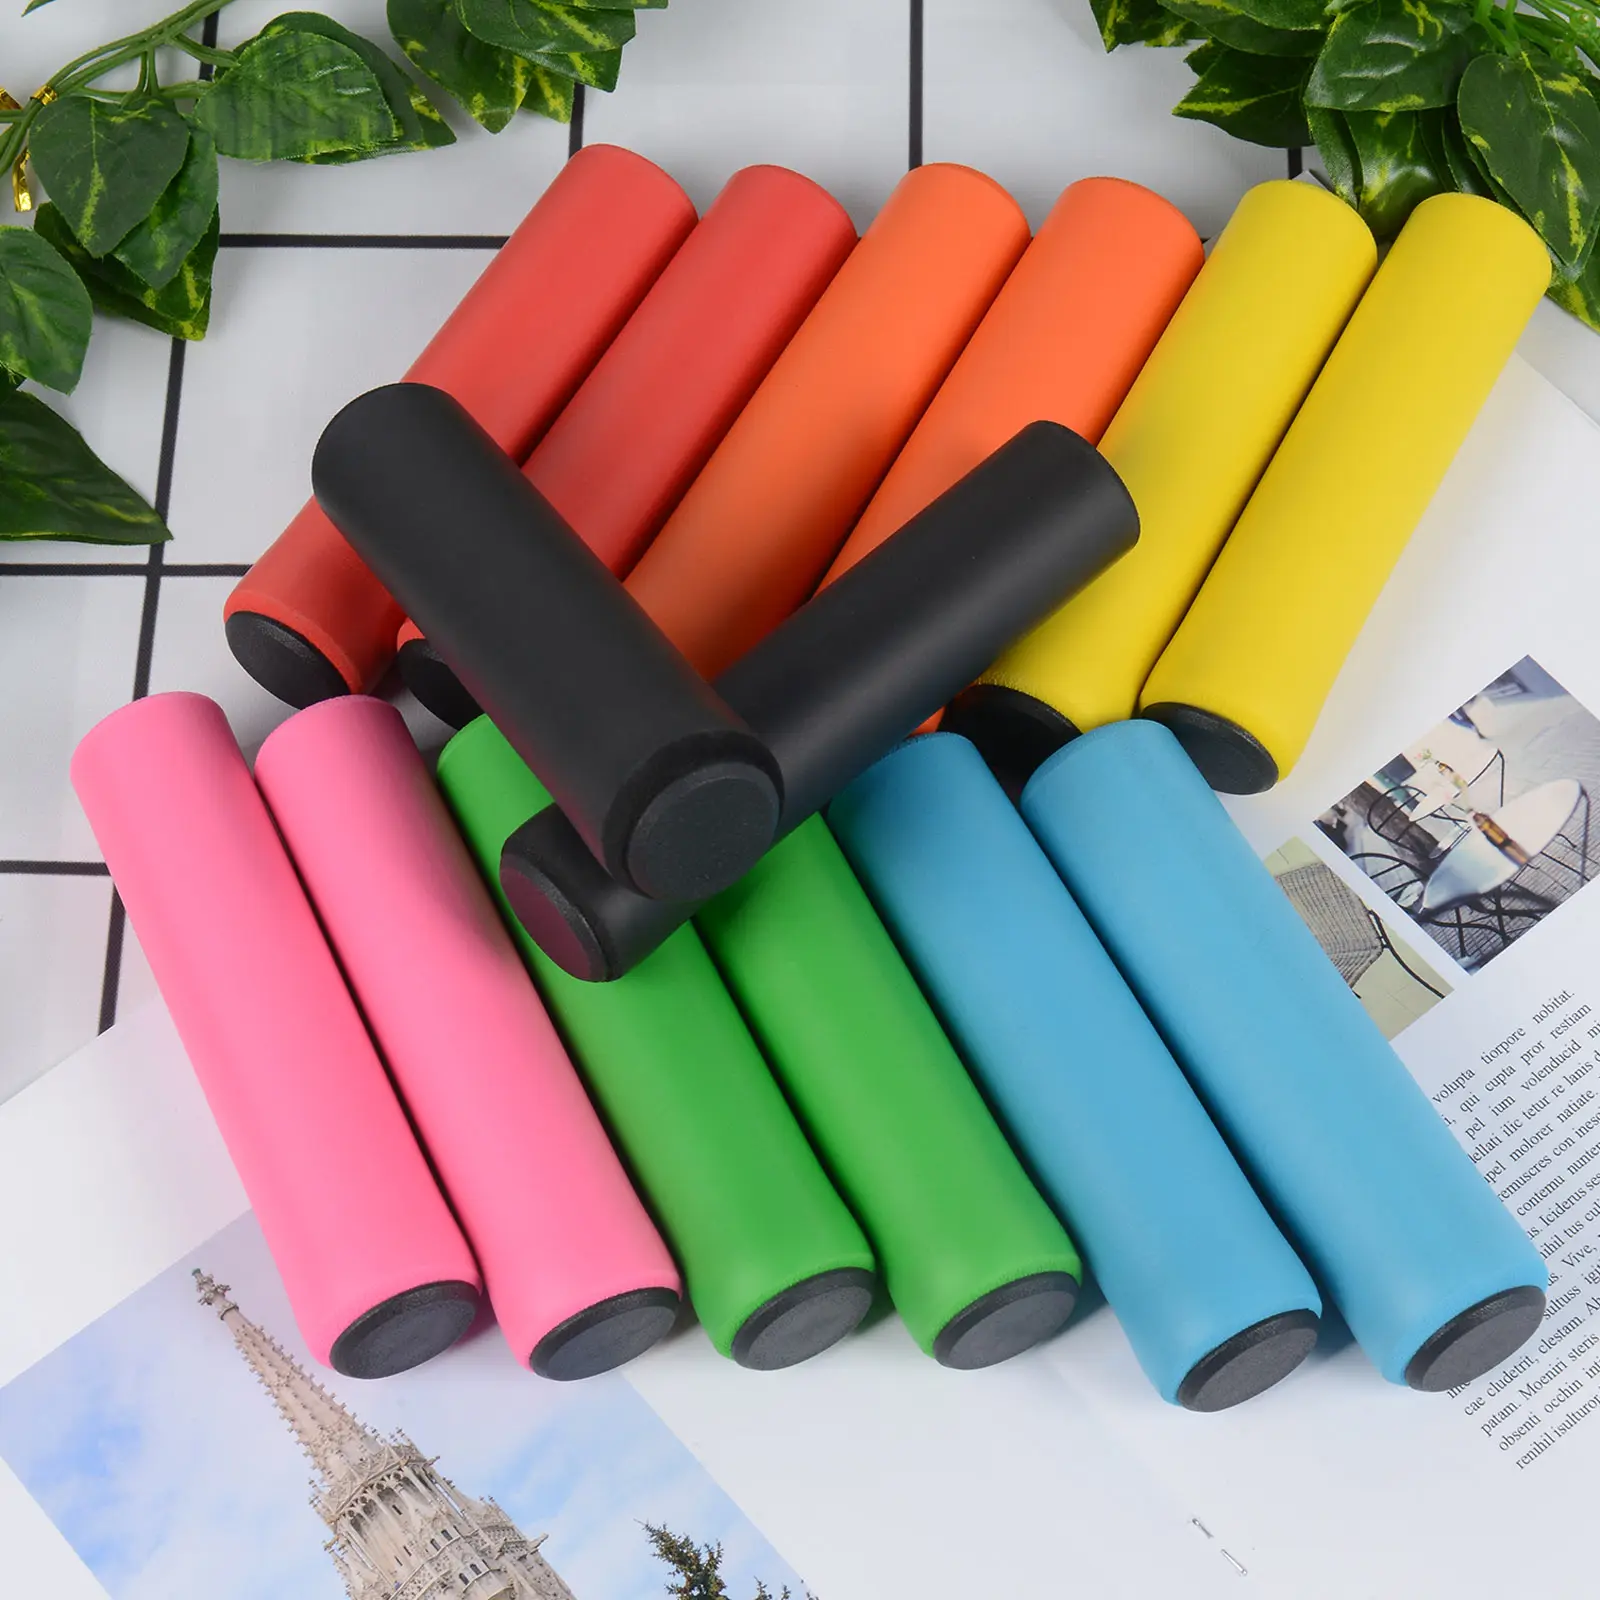 1Pair Silicone Cycling Bicycle Grips Outdoor MTB Mountain Bike Handlebar Grips Cover AntiのStrong Support Grips Bike Part